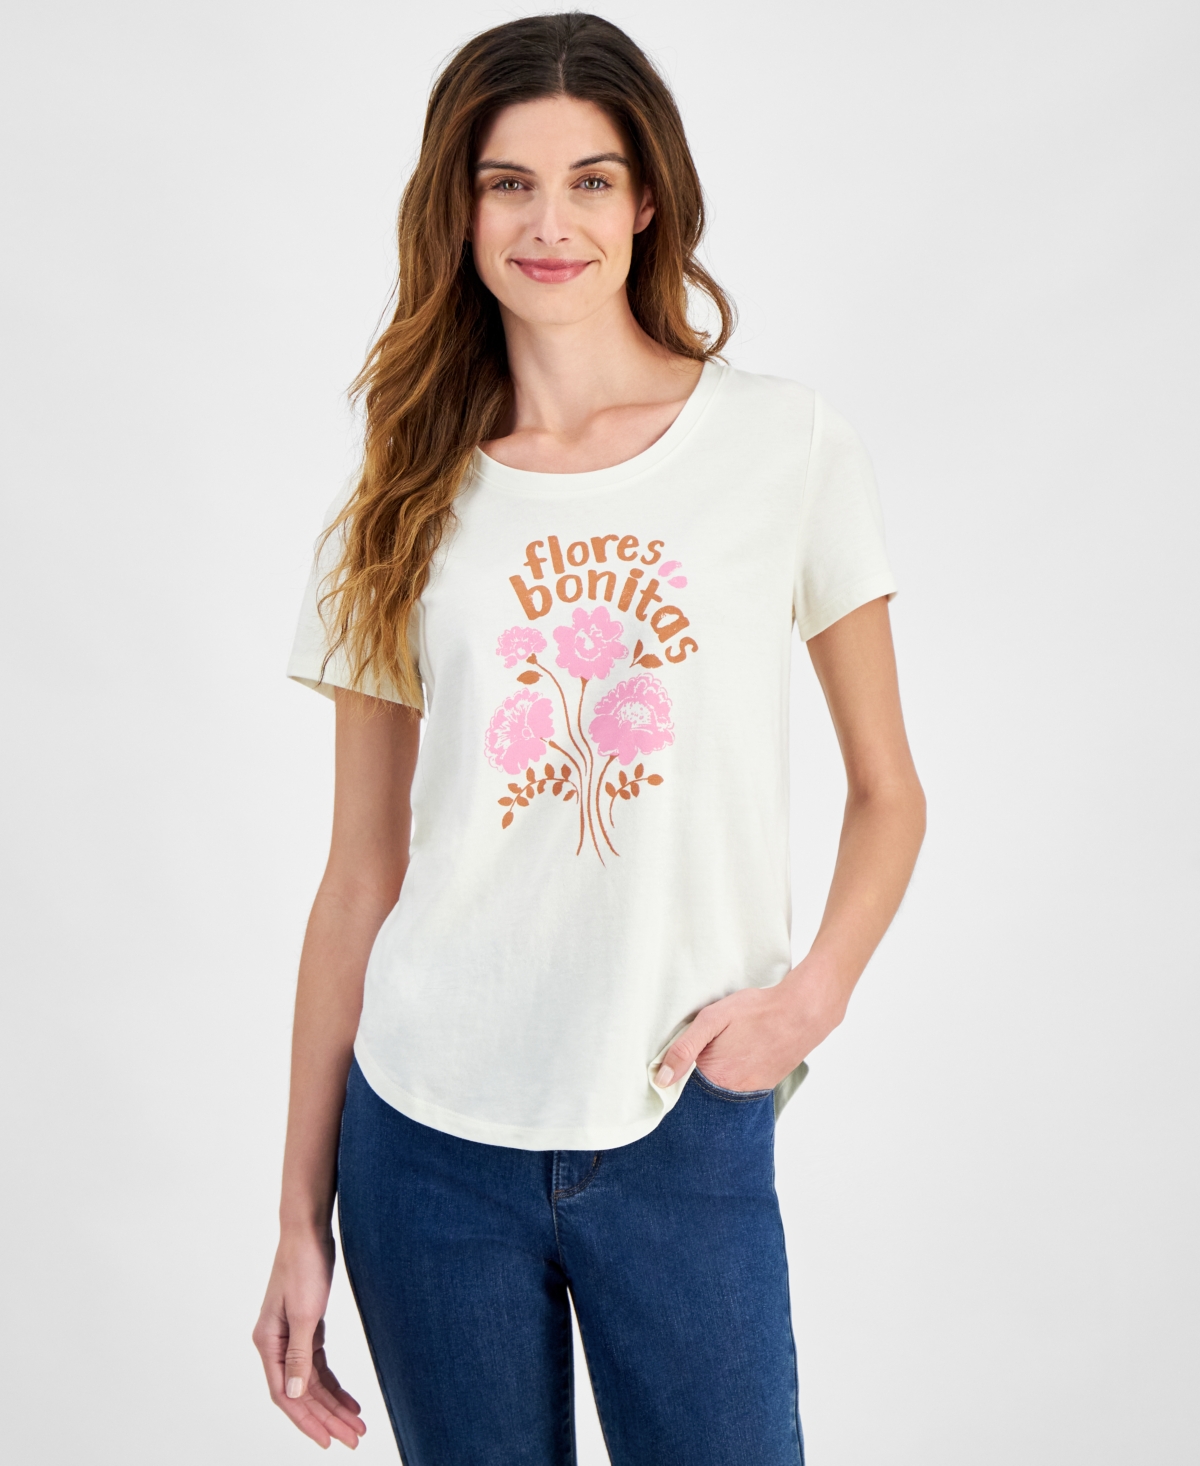 Women's Pretty Flowers Graphic T-Shirt, Created for Macy's - Flres Bnitas Nt